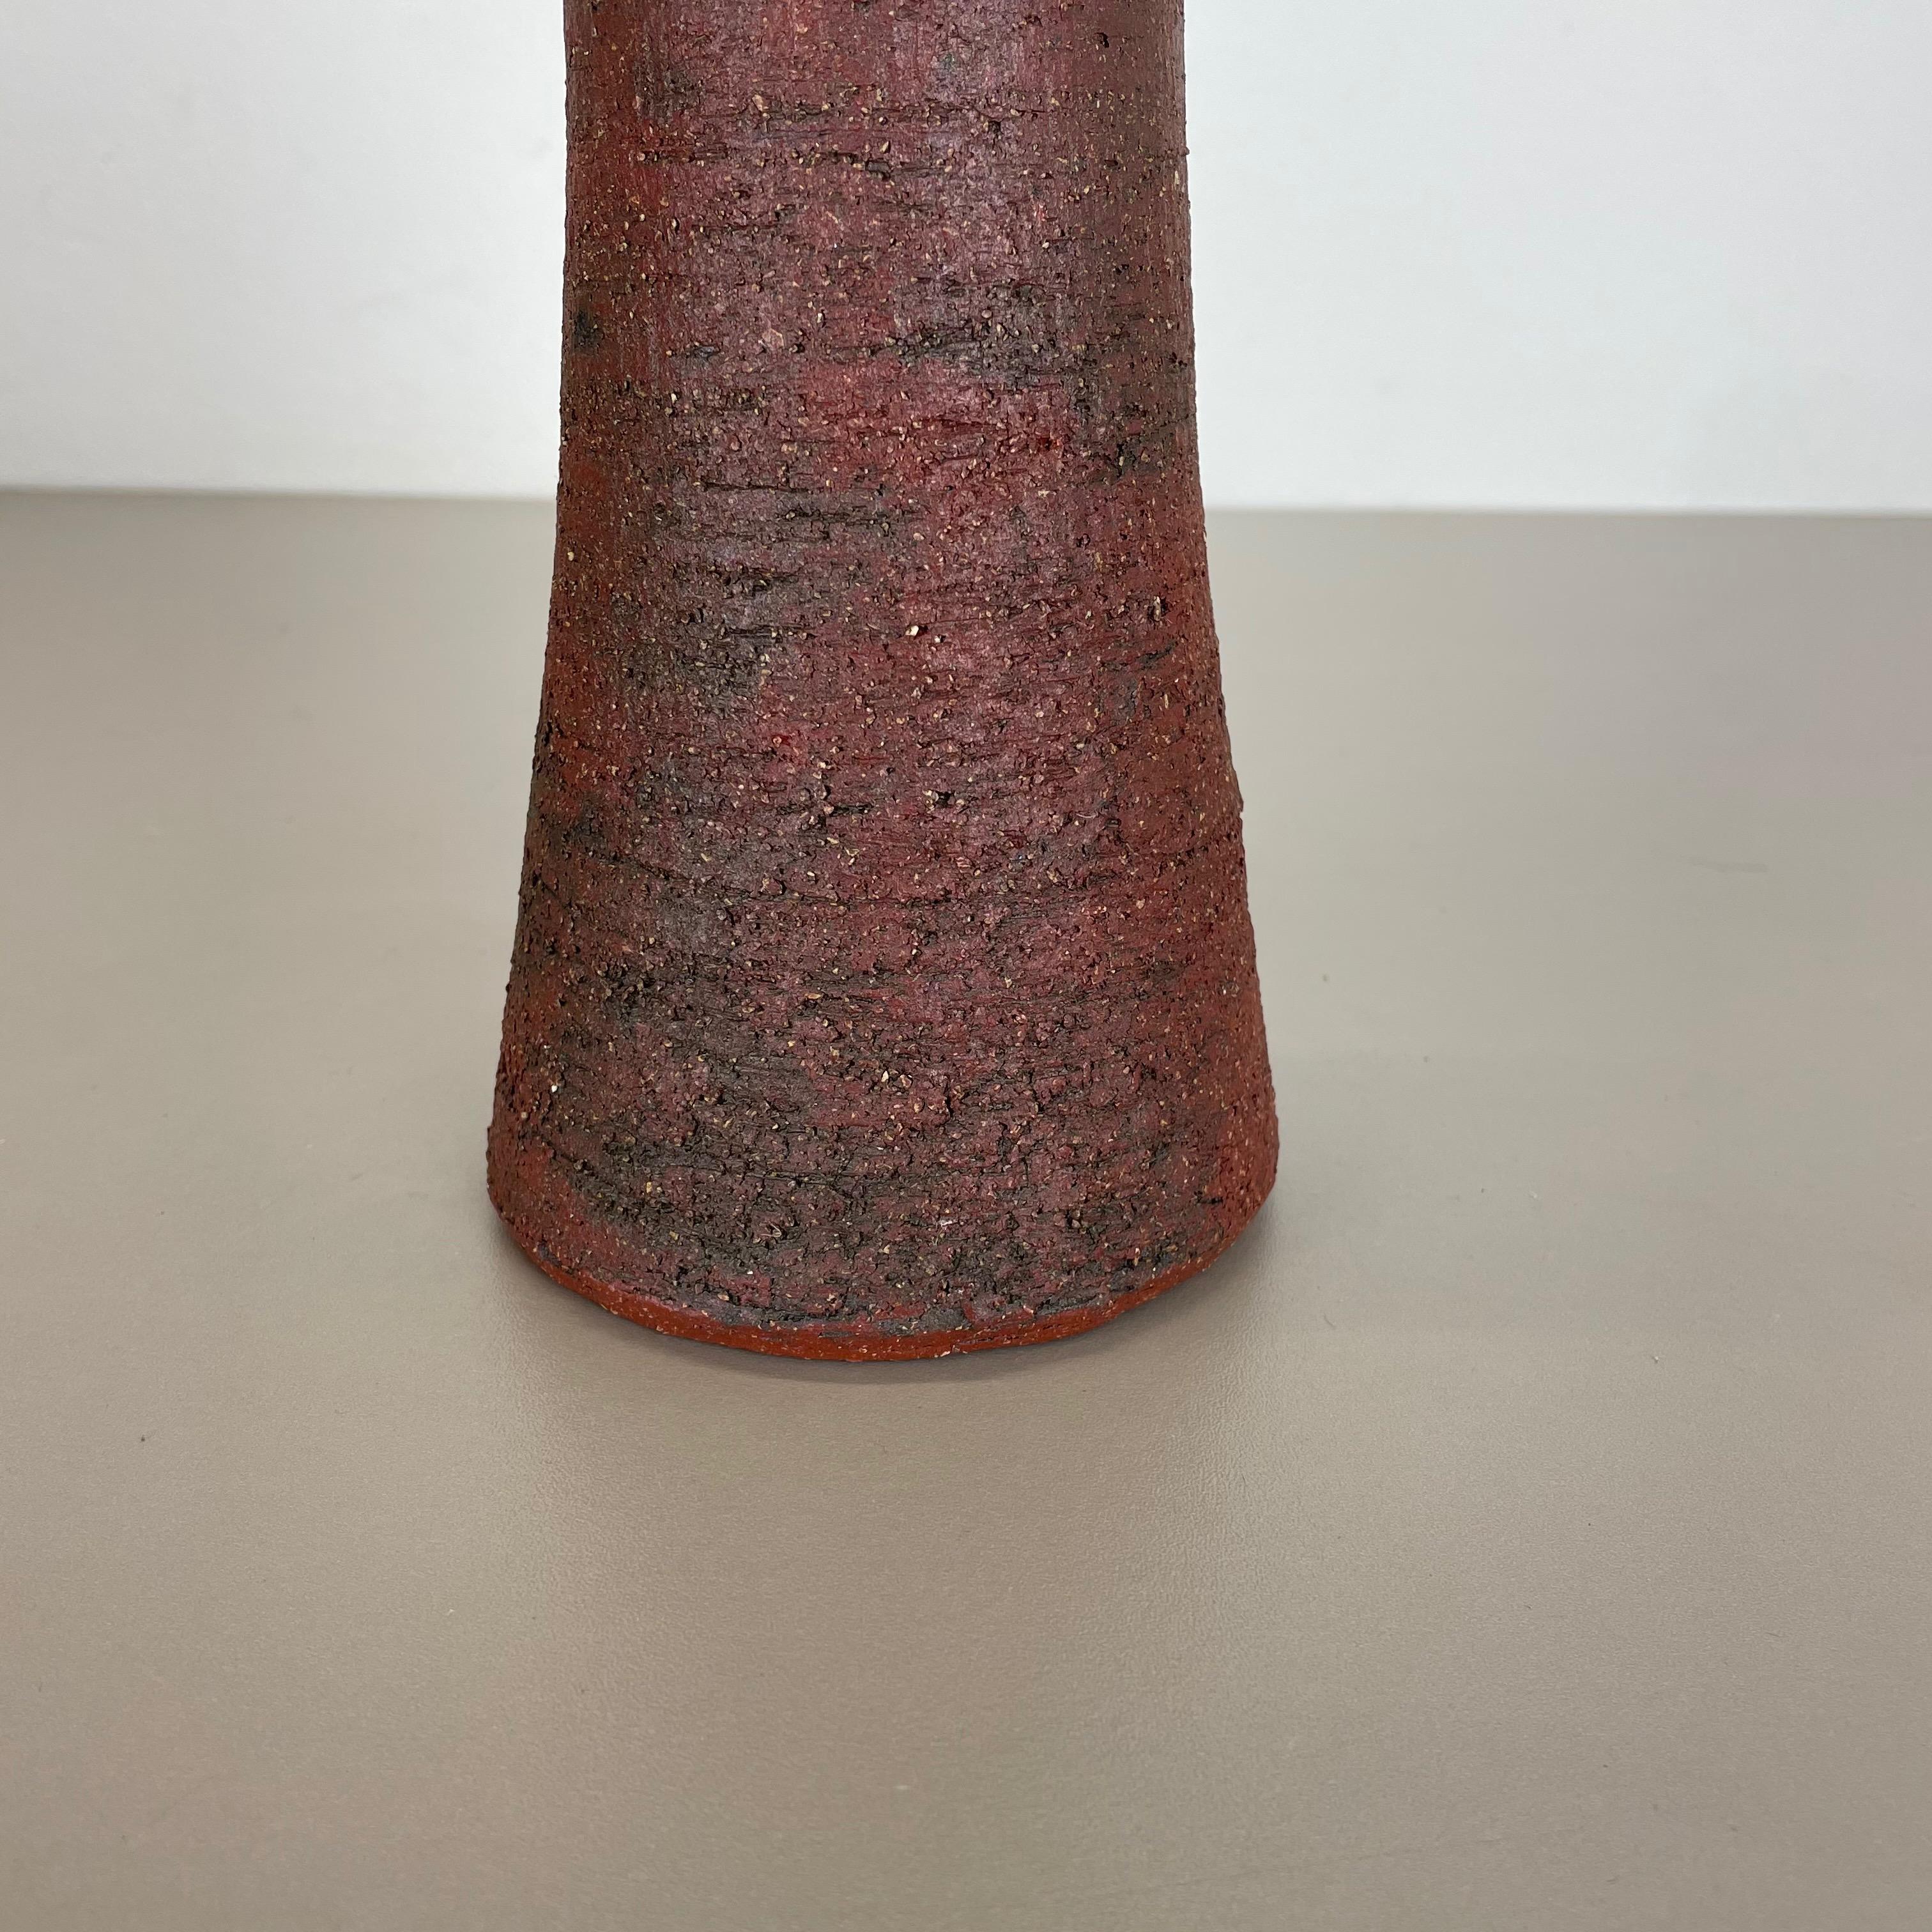 Abstract red Ceramic Studio Pottery Vase by Gerhard Liebenthron, Germany, 1970s For Sale 1